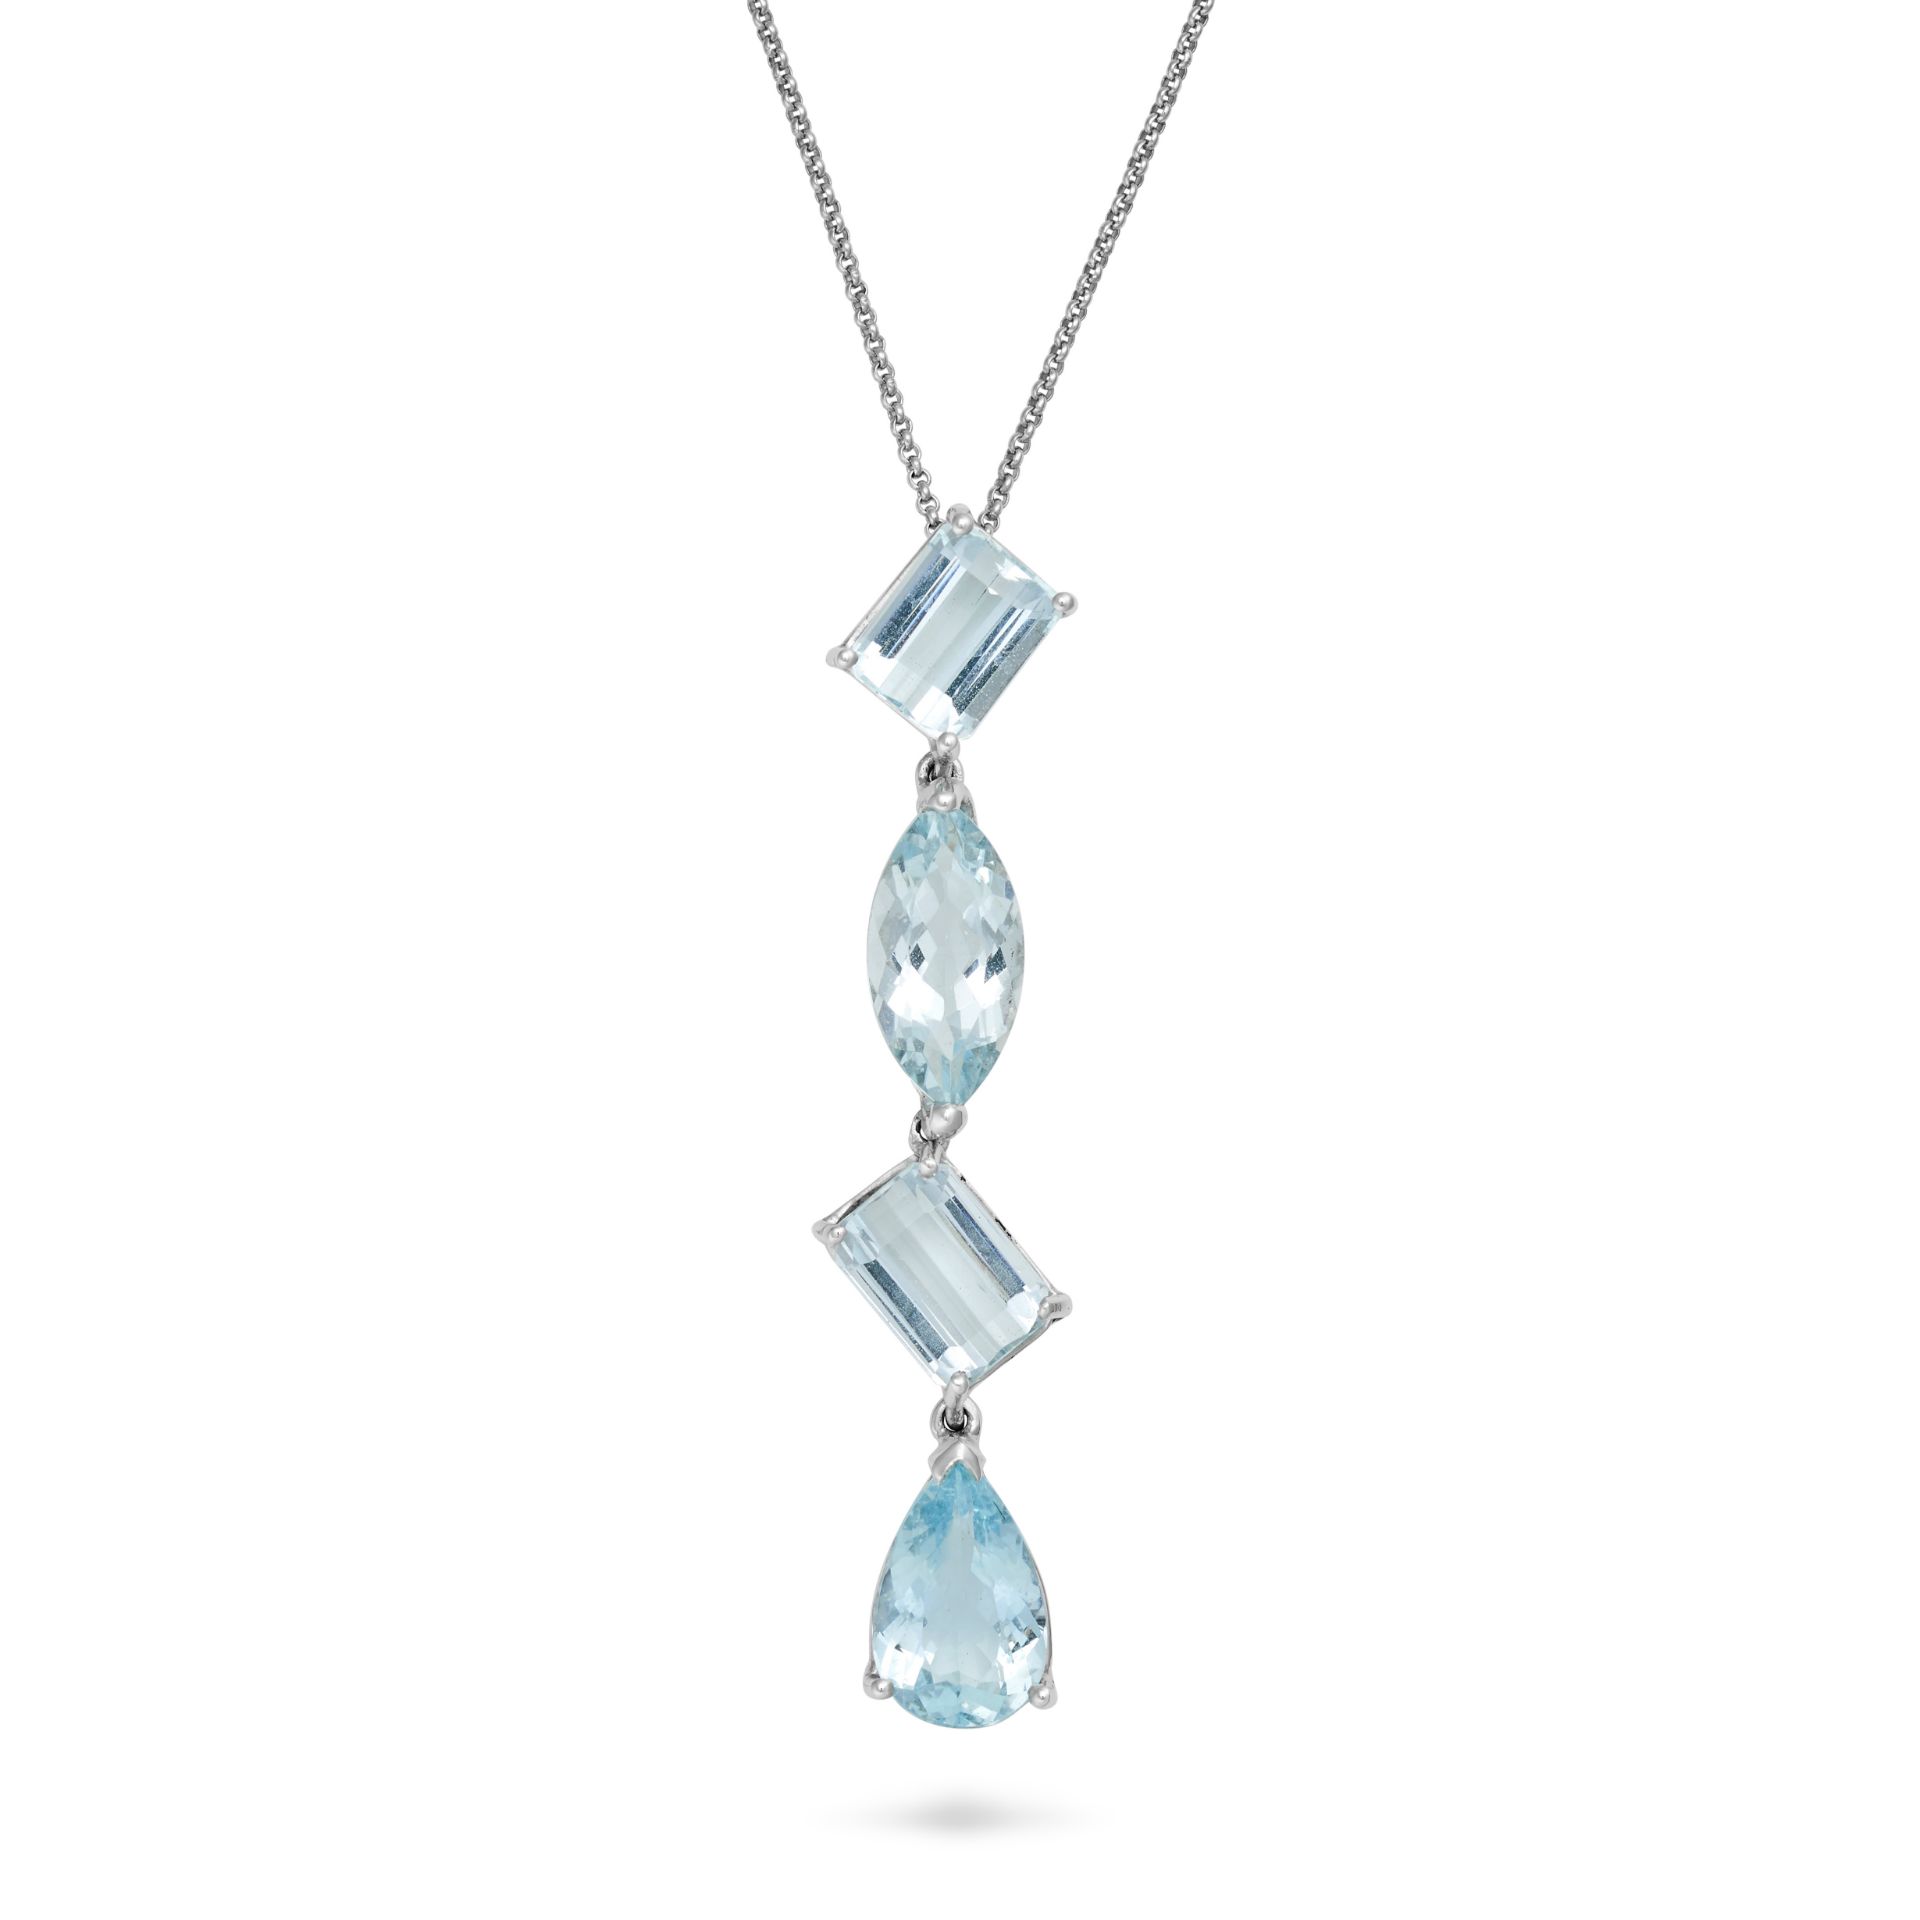 AN AQUAMARINE NECKLACE the pendant set with a row of octagonal step, marquise and pear cut aquama...